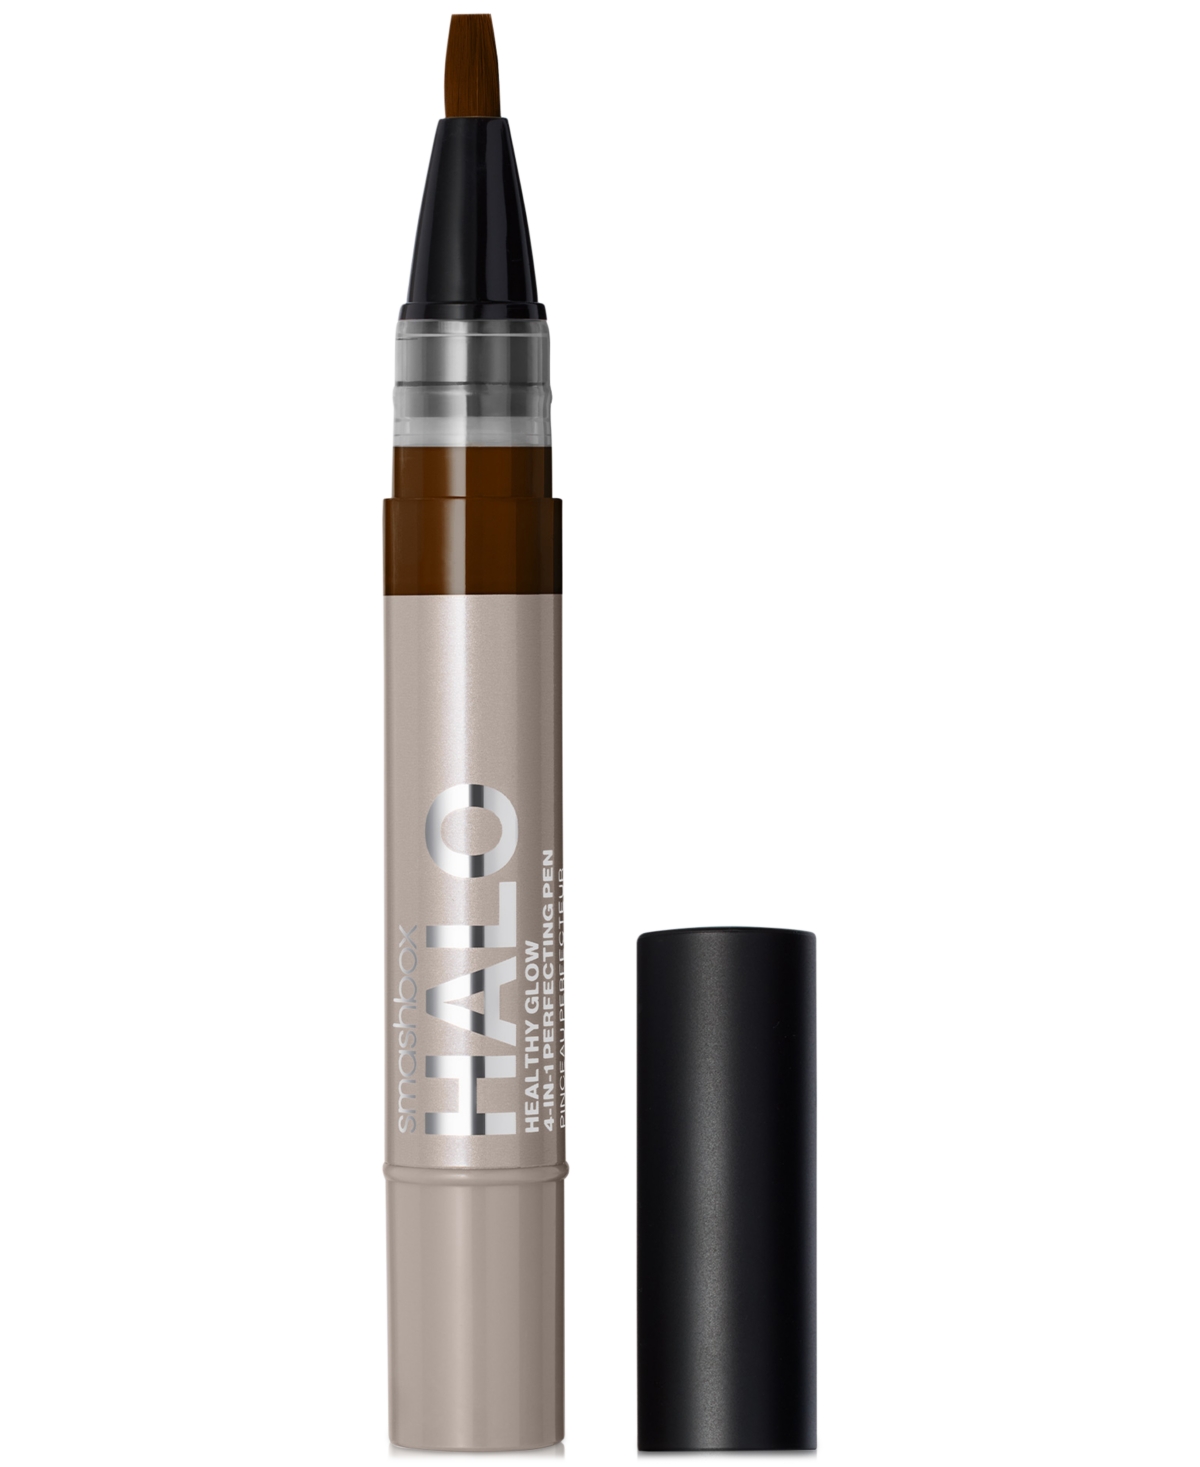 Smashbox Halo Healthy Glow 4-in-1 Perfecting Pen In D-n (level-two Dark With A Neutral Under